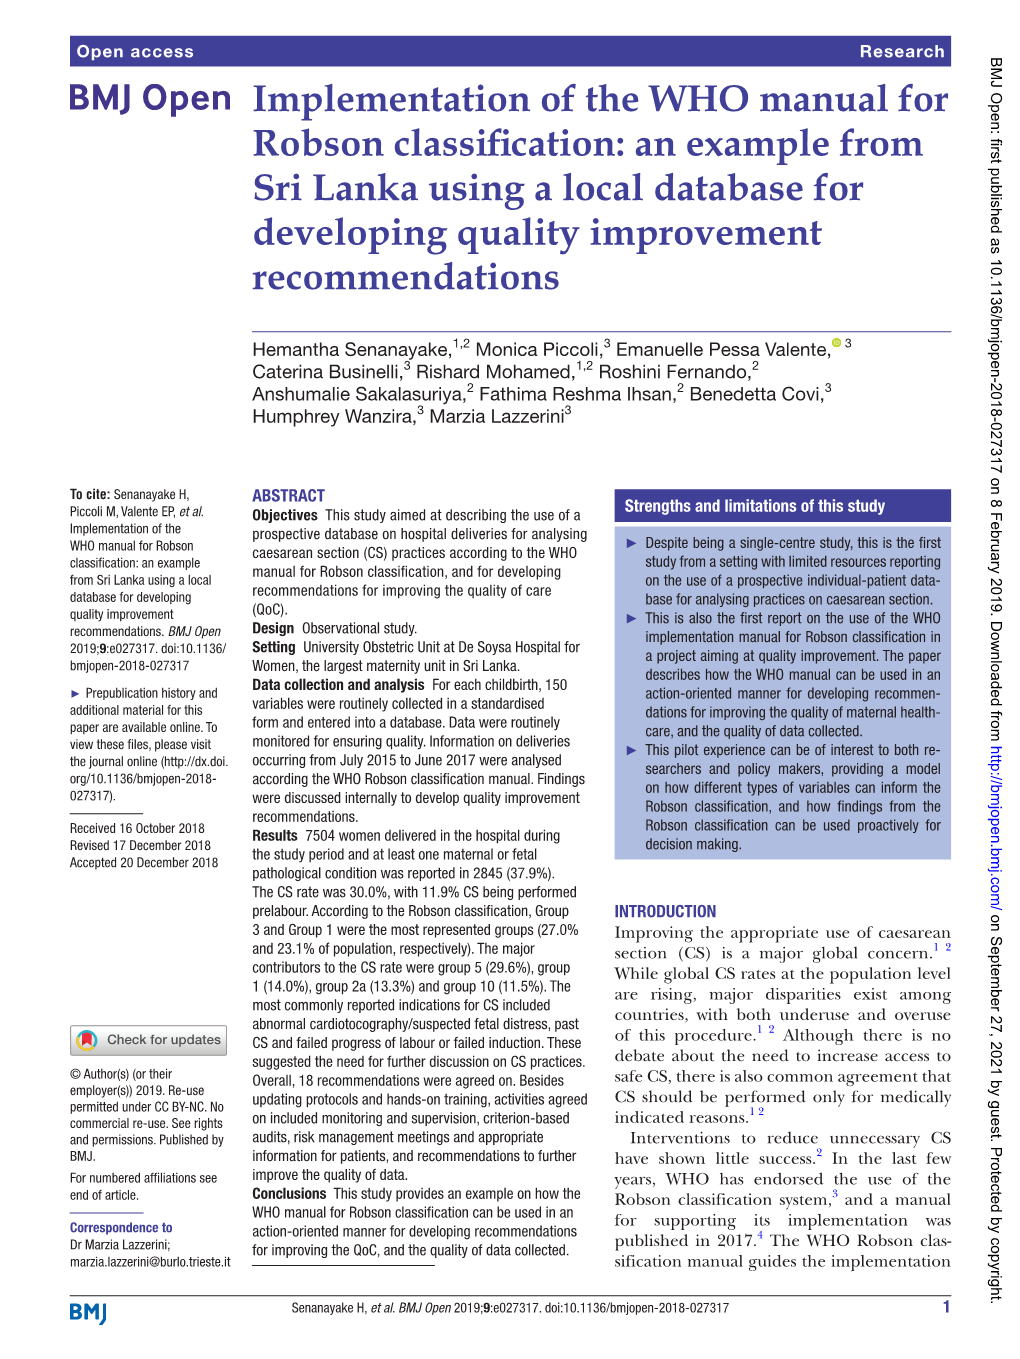 Implementation of the WHO Manual for Robson Classification: an Example from Sri Lanka Using a Local Database for Developing Quality Improvement Recommendations